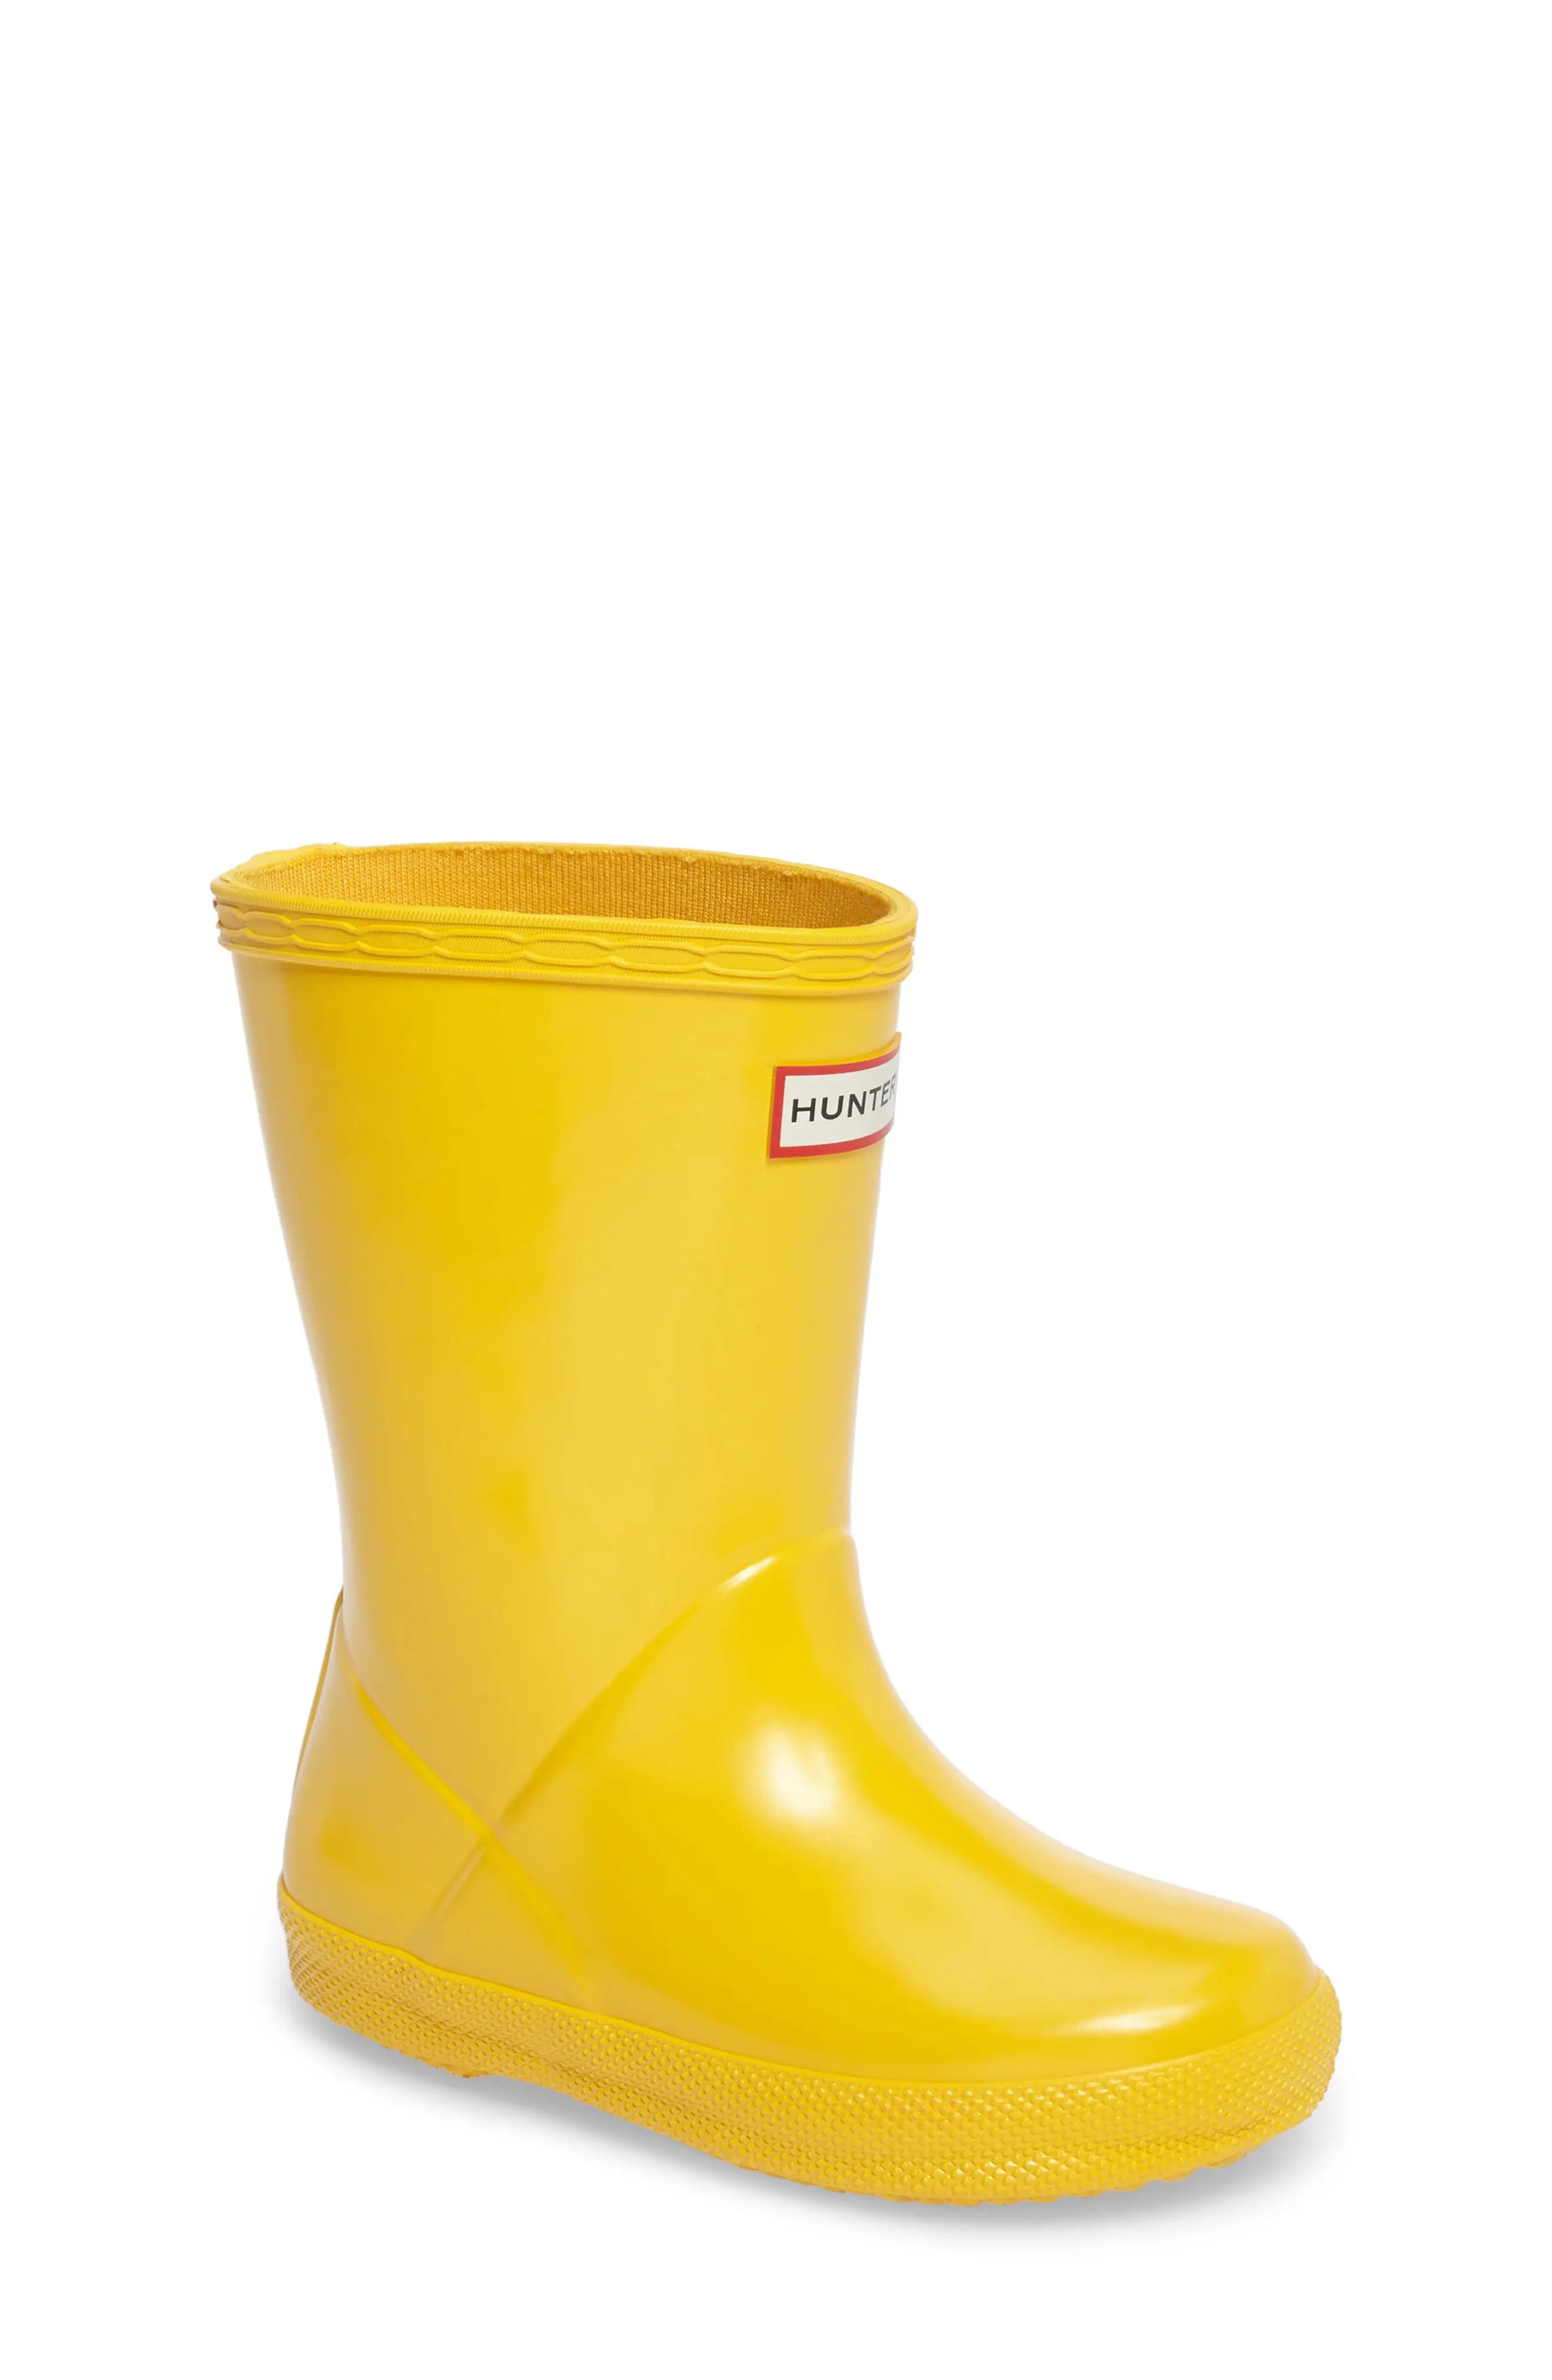 Toddler Hunter 'First Gloss' Rain Boot, Size 12 M - Yellow | Nordstrom